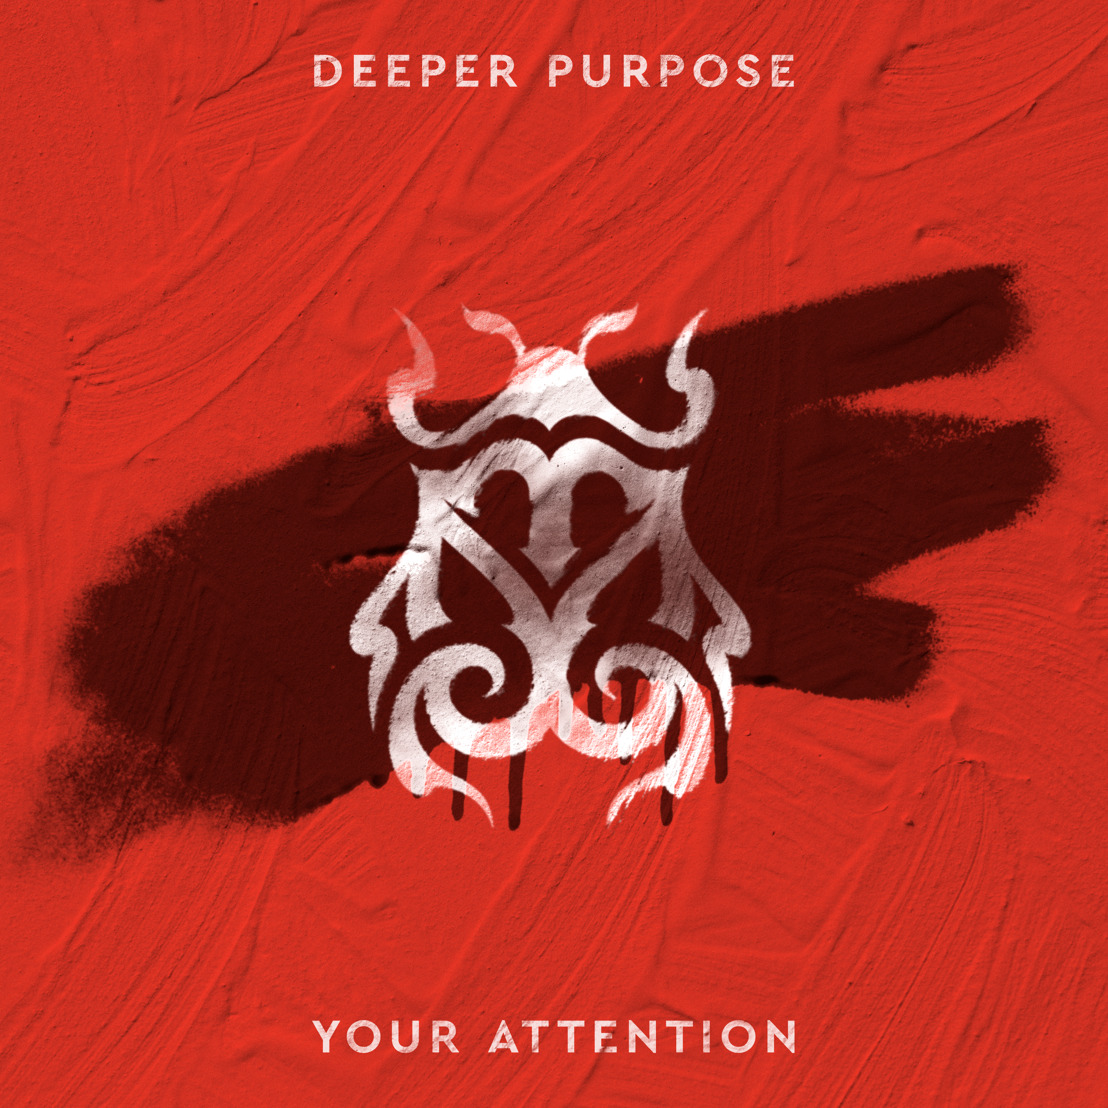 Deeper Purpose arrives on Tomorrowland Music with ‘Your Attention’